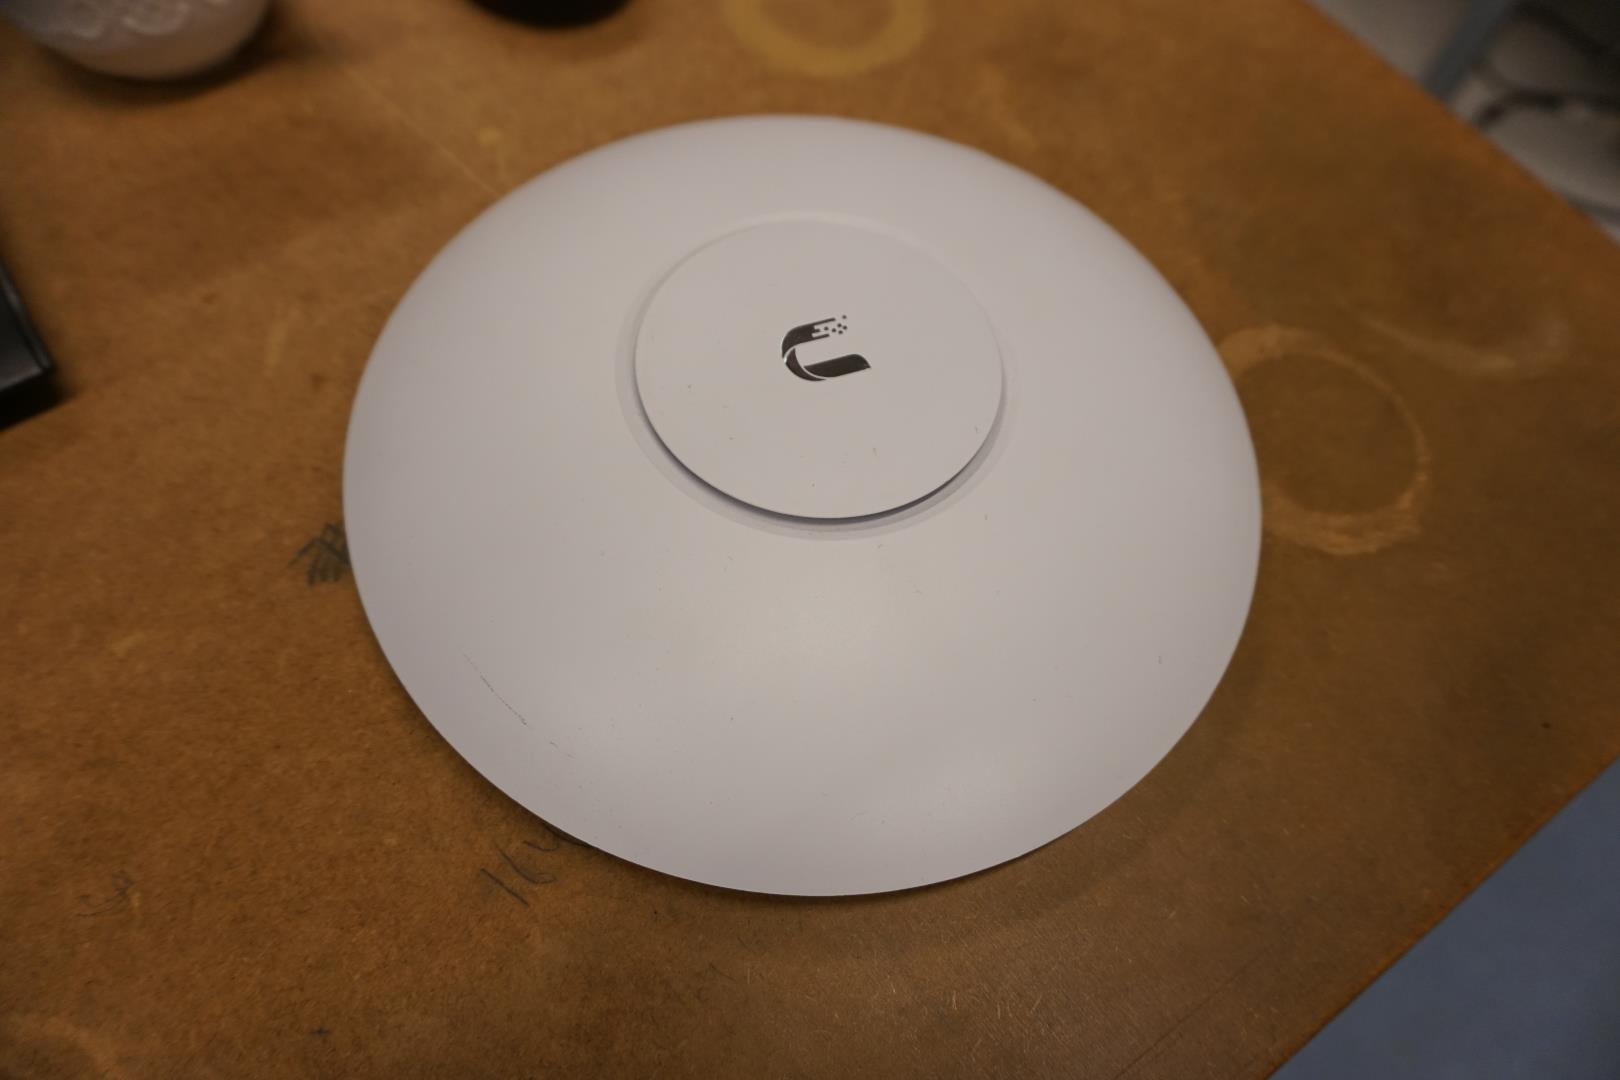 WiFi access point